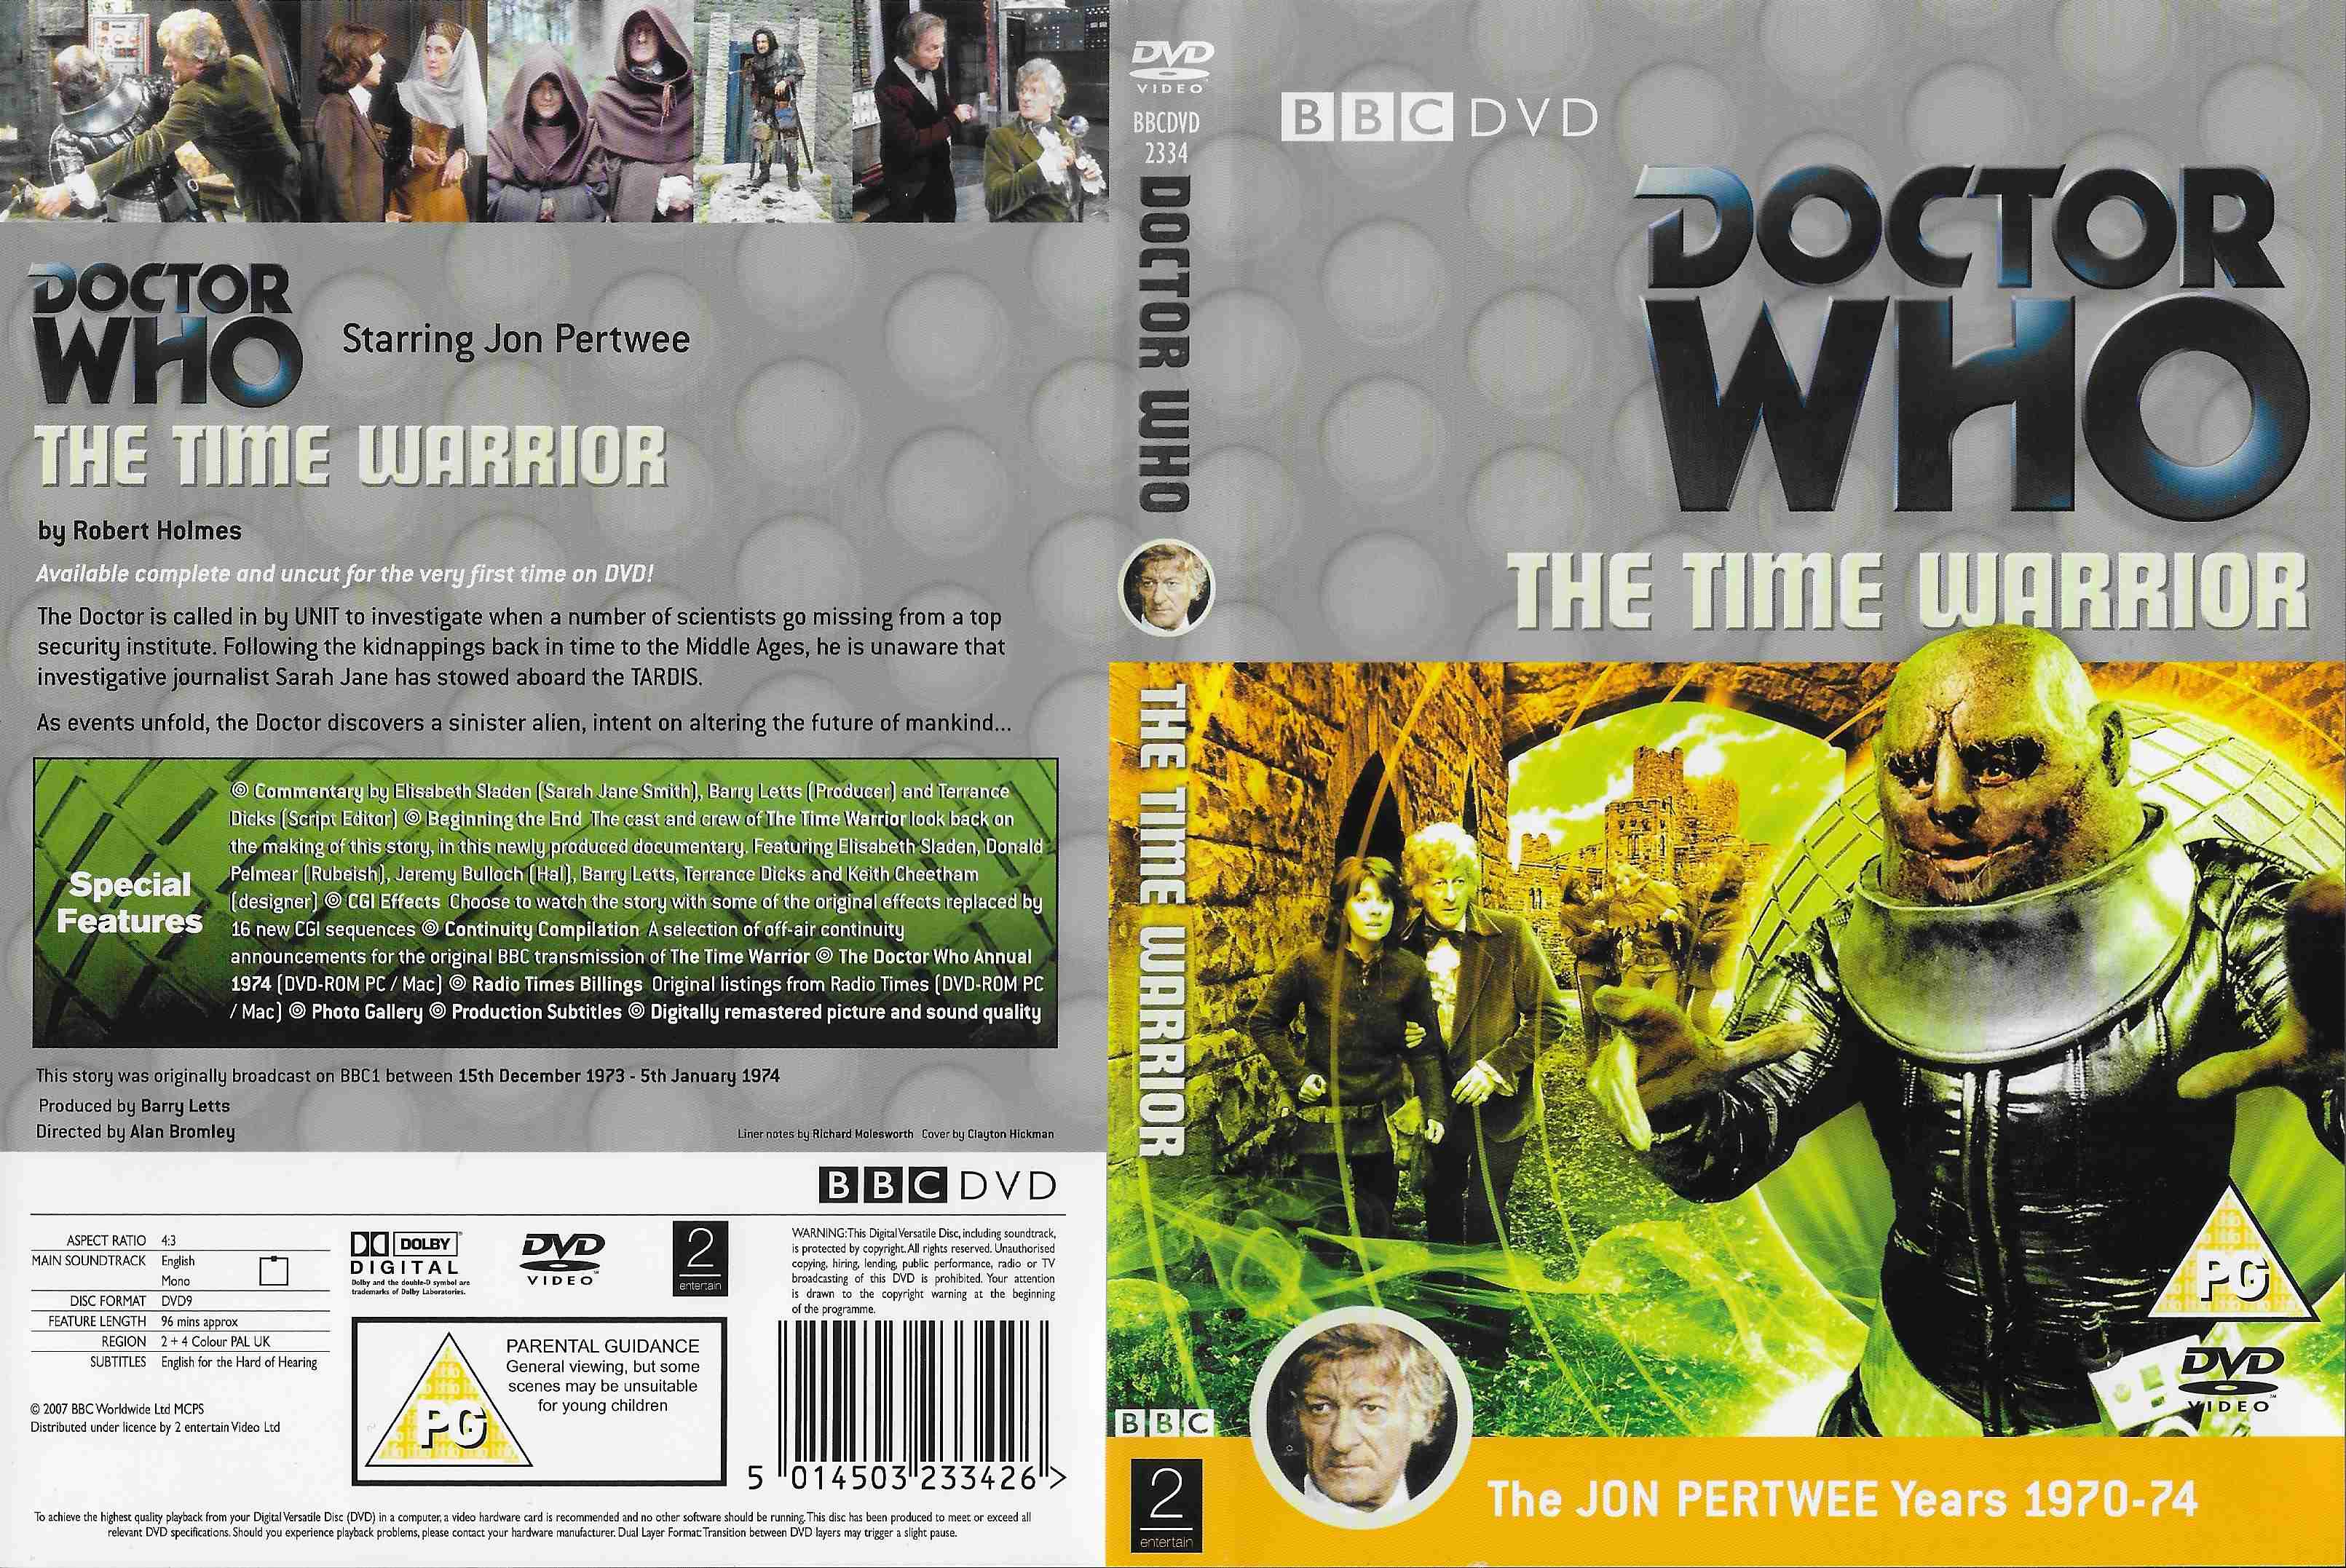 Picture of BBCDVD 2334 Doctor Who - The time warrior by artist Robert Holmes from the BBC records and Tapes library